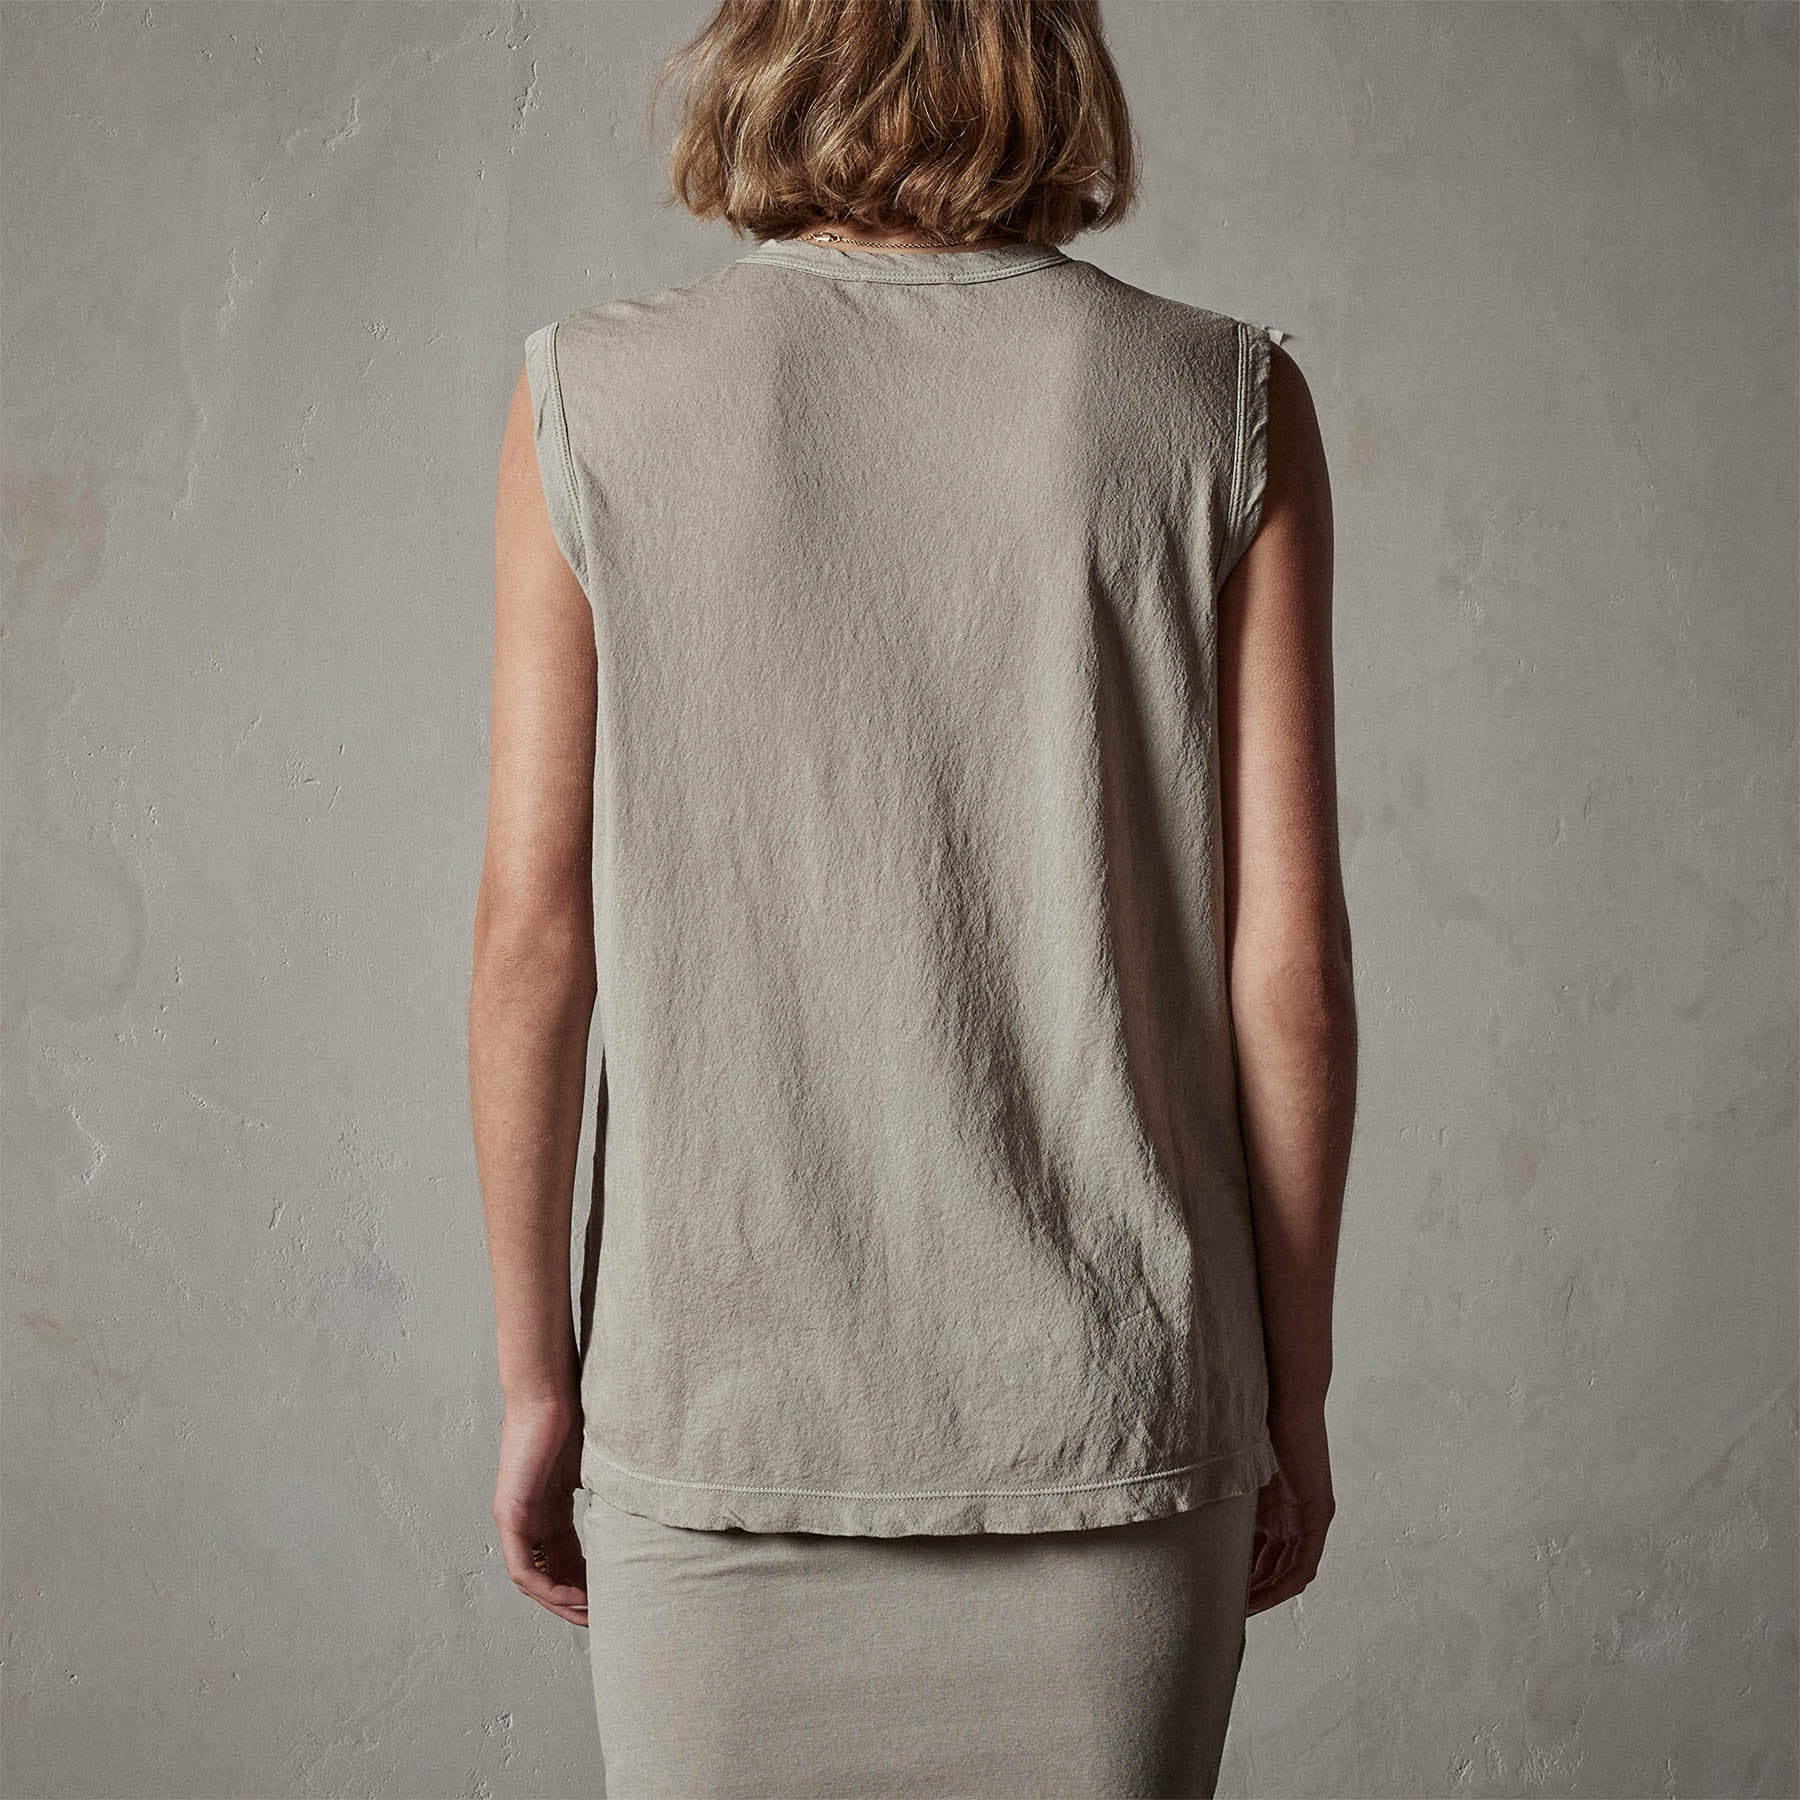 JAMES PERSE Relaxed Fit Jersey Muscle Tank in Stone 3/L